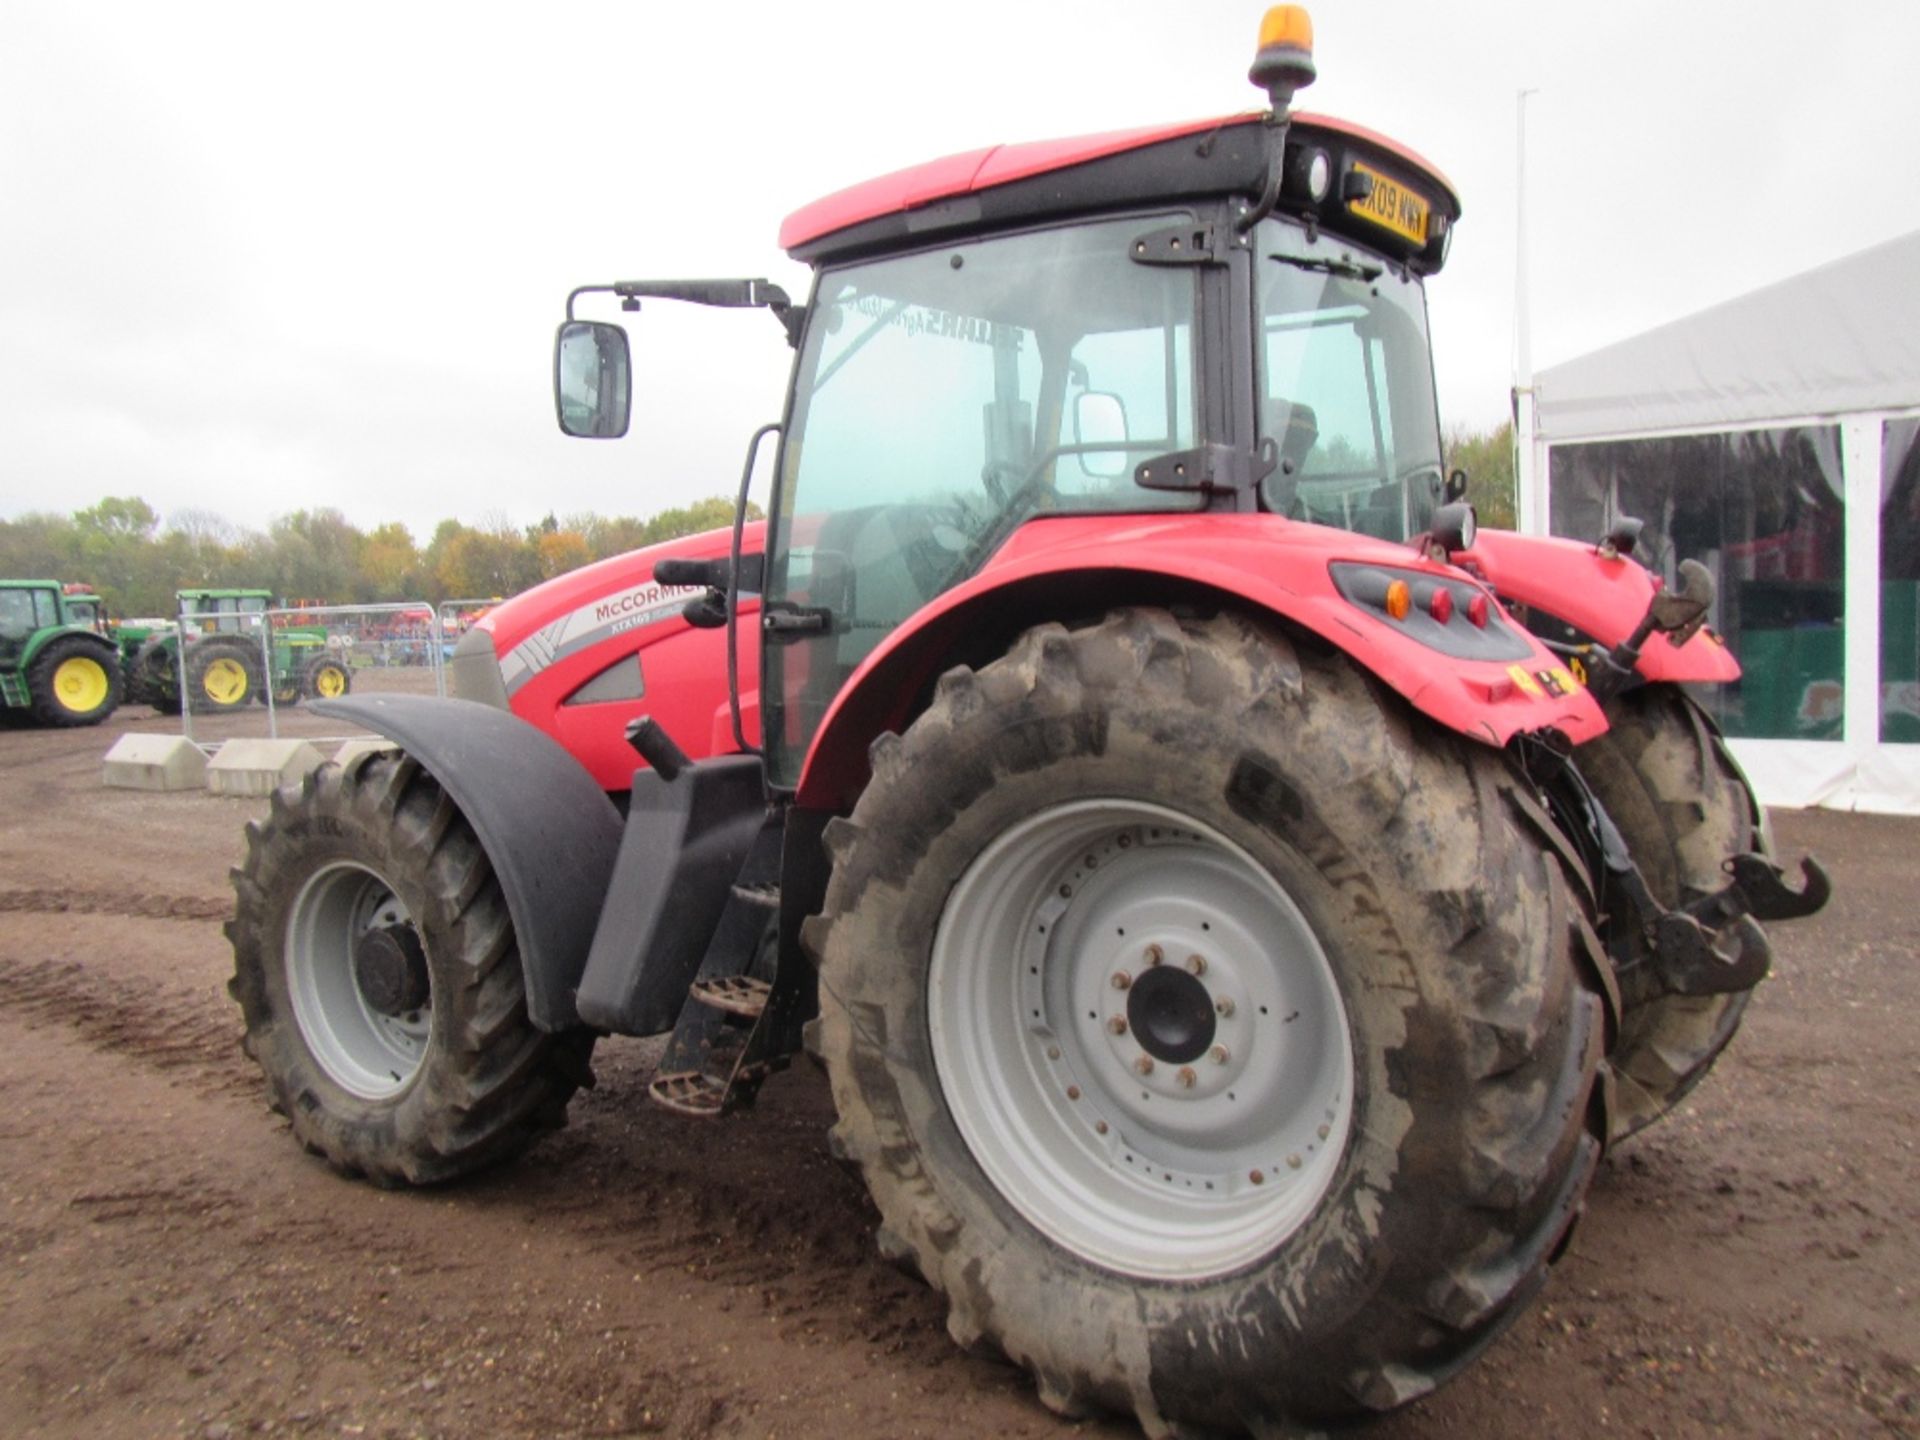 McCormick XTX165 Tractor. Reg Docs will be supplied. 3948 hrs. Reg. No. DX09 MWN. Ser No 44062 - Image 10 of 18